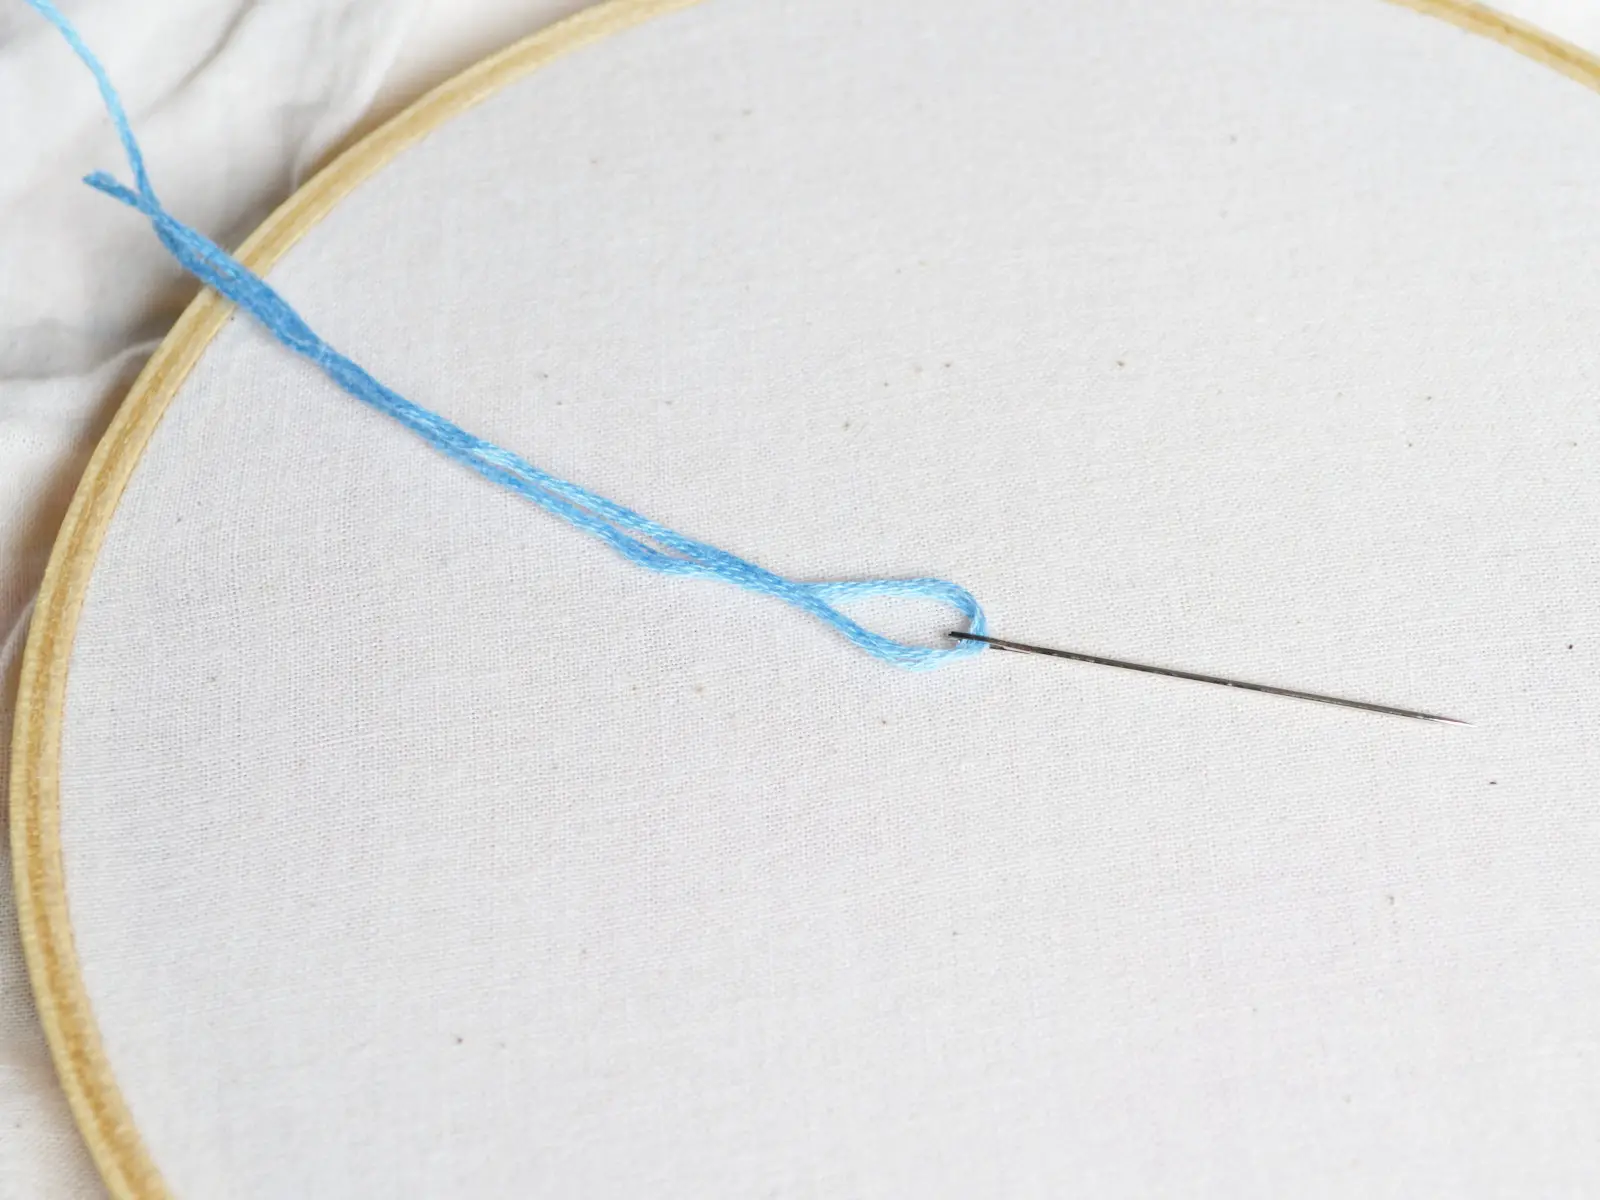 threaded needle sitting on embroidery hoop with fabric